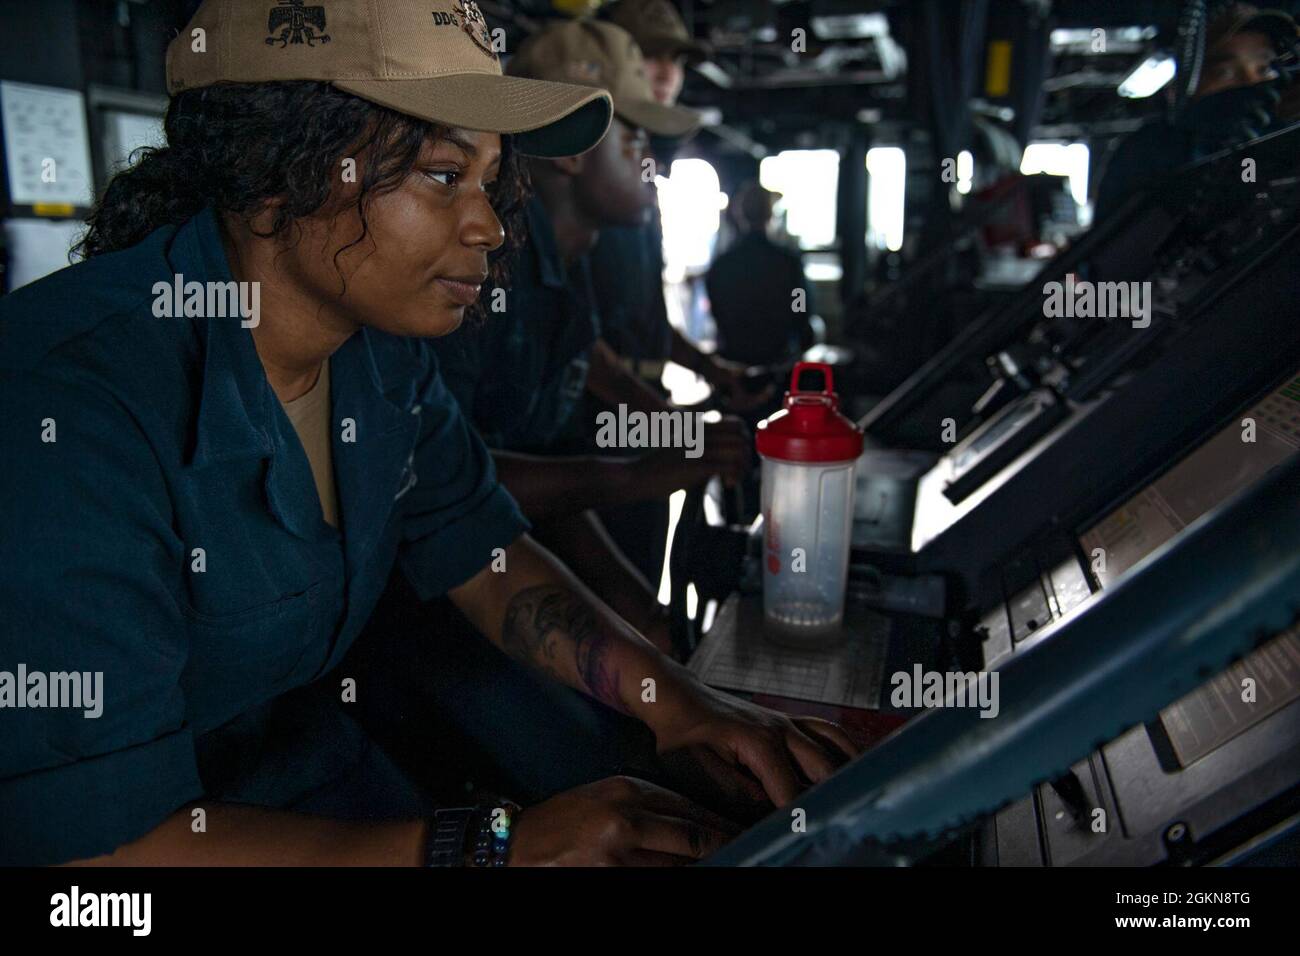 210603-N-HG846-1005 SEA OF JAPAN (June 3, 2021) – Retail Specialist Seaman Alescia Pugh, from Schenectady, N.Y., mans the lee helm in the pilot house aboard Arleigh Burke-class guided-missile destroyer USS Rafael Peralta (DDG 115). Rafael Peralta is assigned to Commander, Task Force 71/Destroyer Squadron (DESRON) 15, the Navy's largest forward-deployed DESRON and U.S. 7th Fleet's principal surface force. Stock Photo